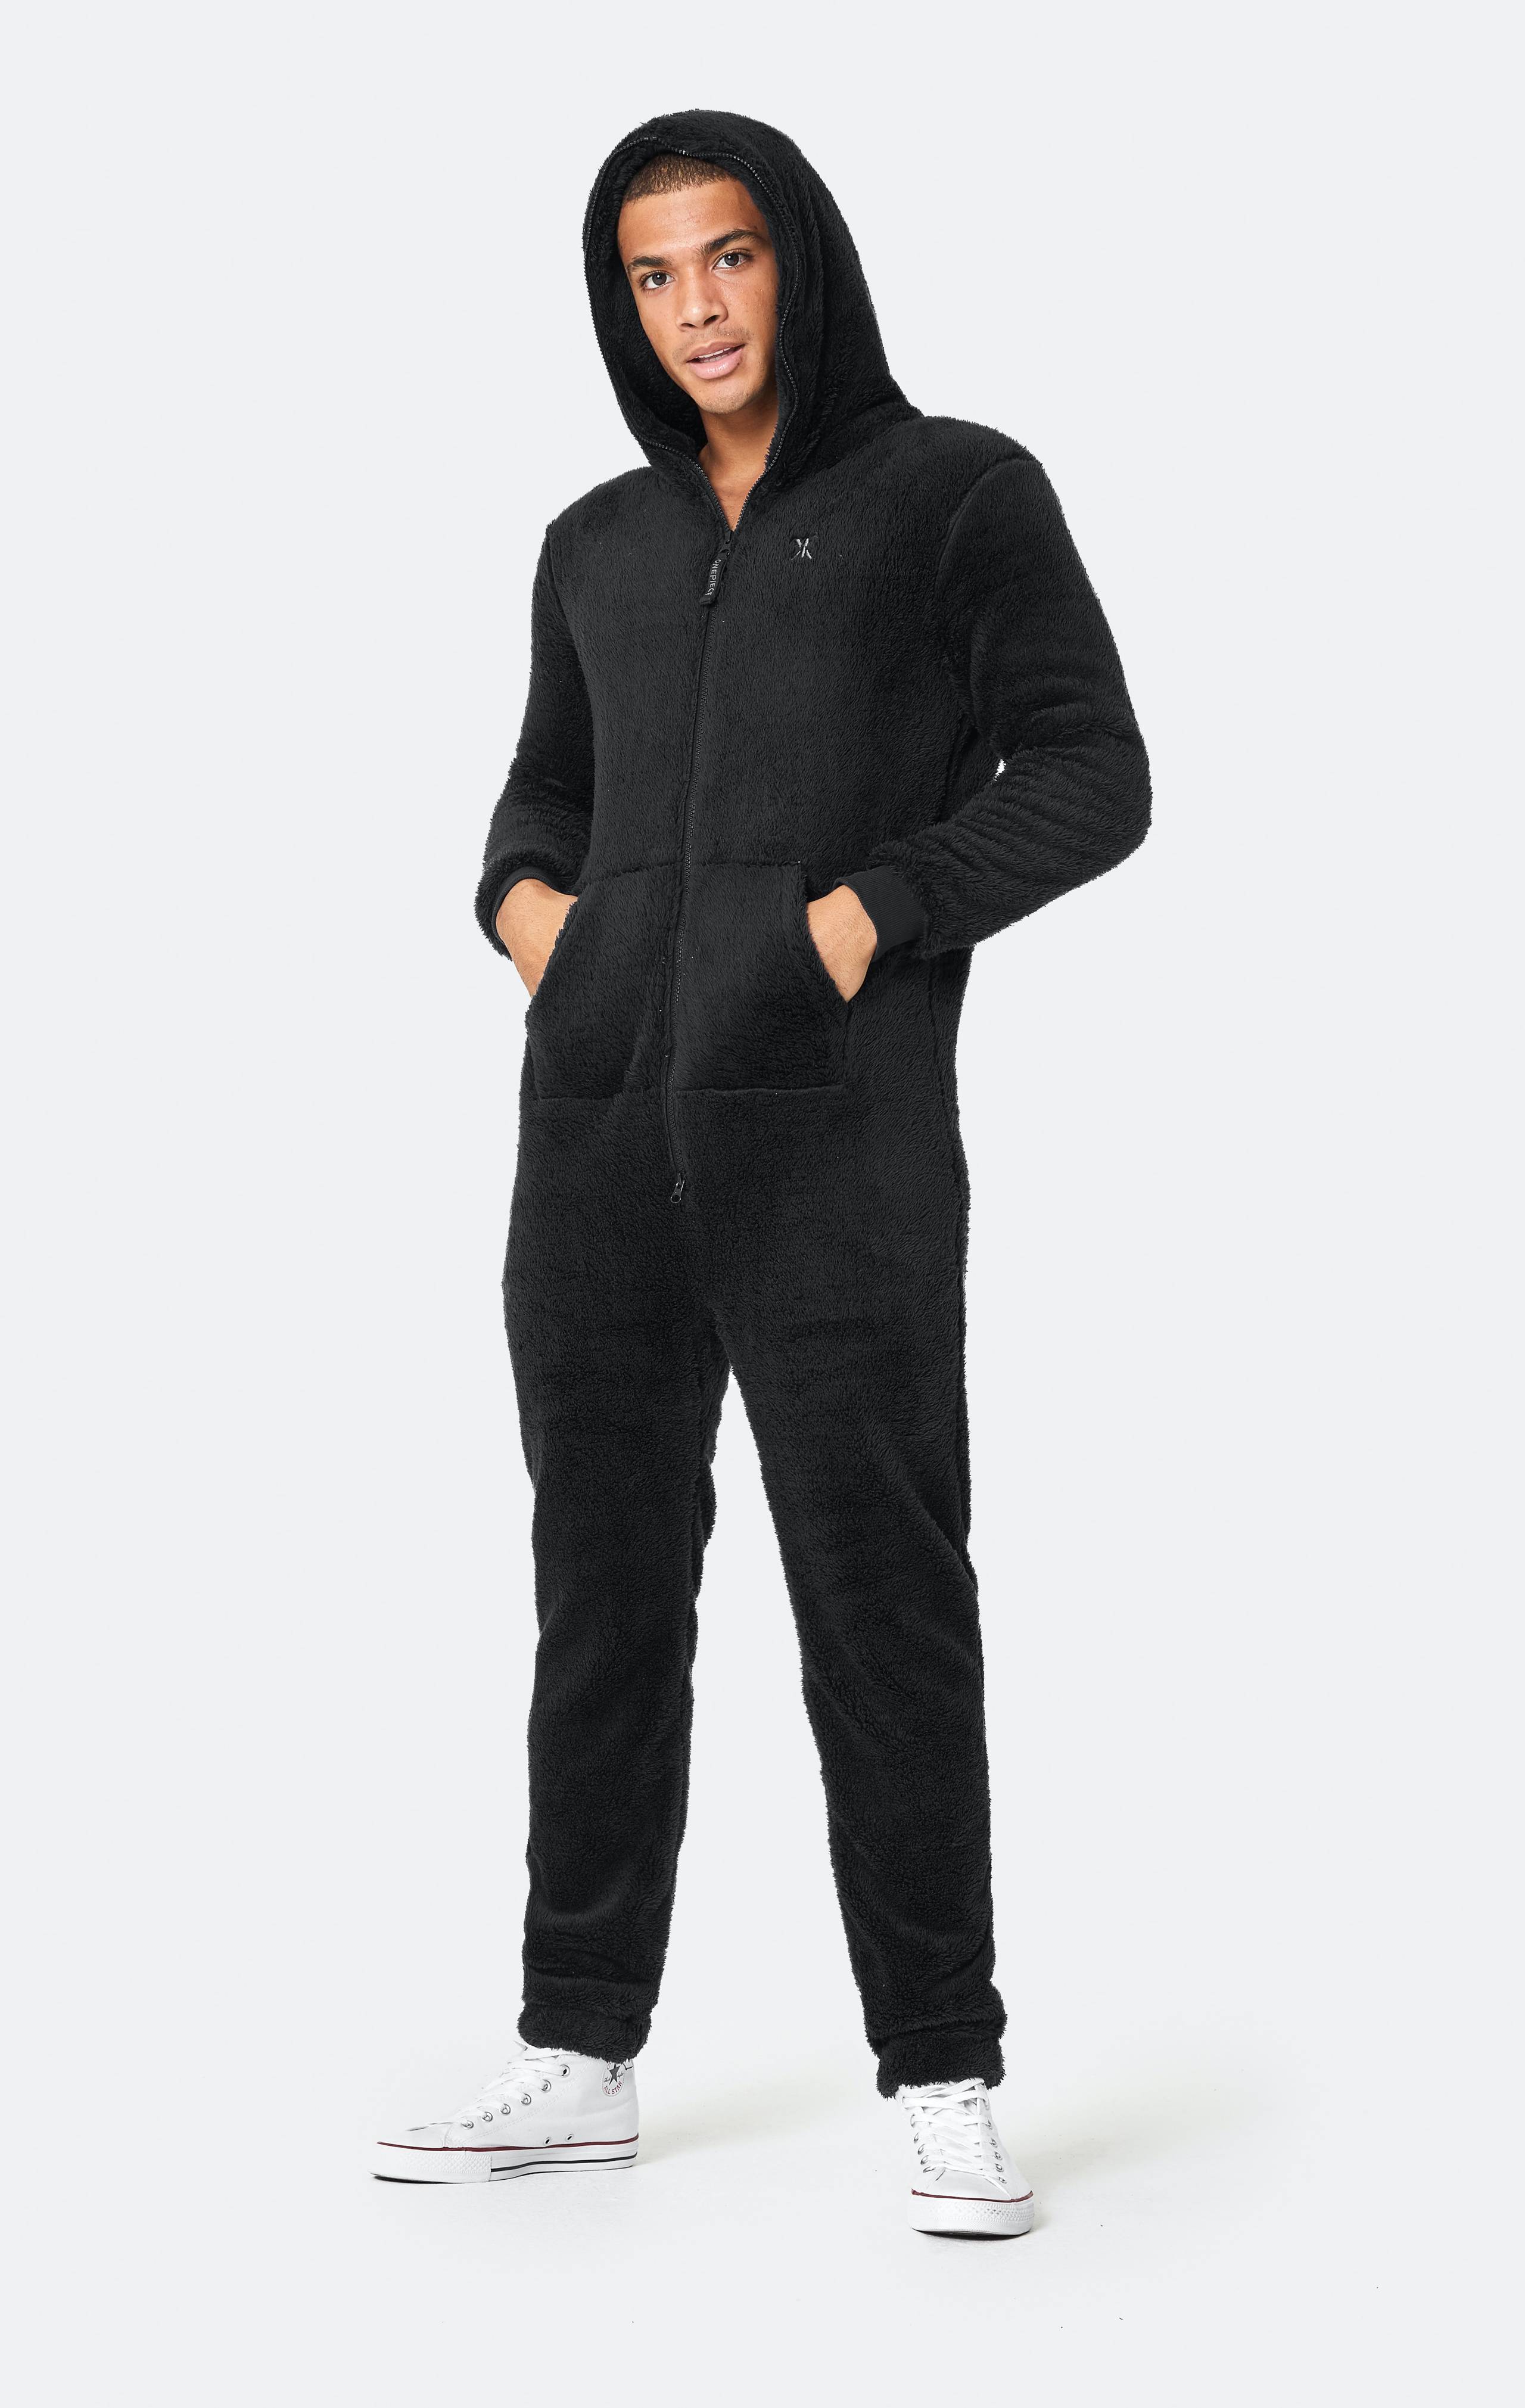 Onepiece The New Puppy Jumpsuit Black - 2